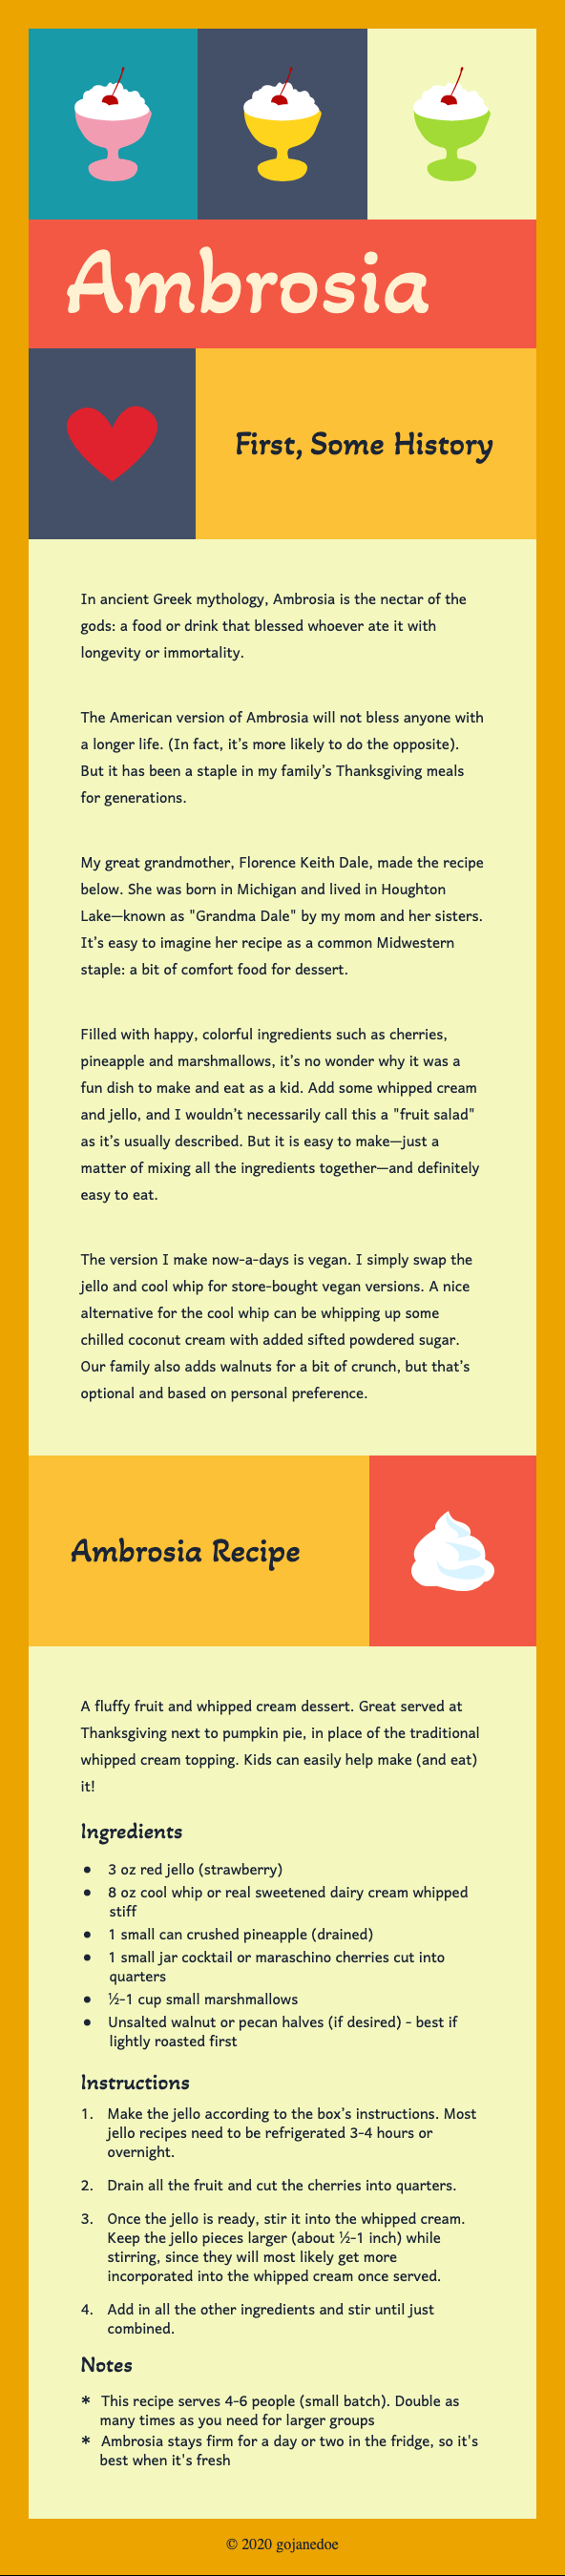 Screenshot of the ambrosia webpage at a tablet screen size. A grid of illustrations of cups of whipped cream and cherries, and a heart are followed by a section of text explaining the history of the recipe. Below that is the ambrosia recipe itself.